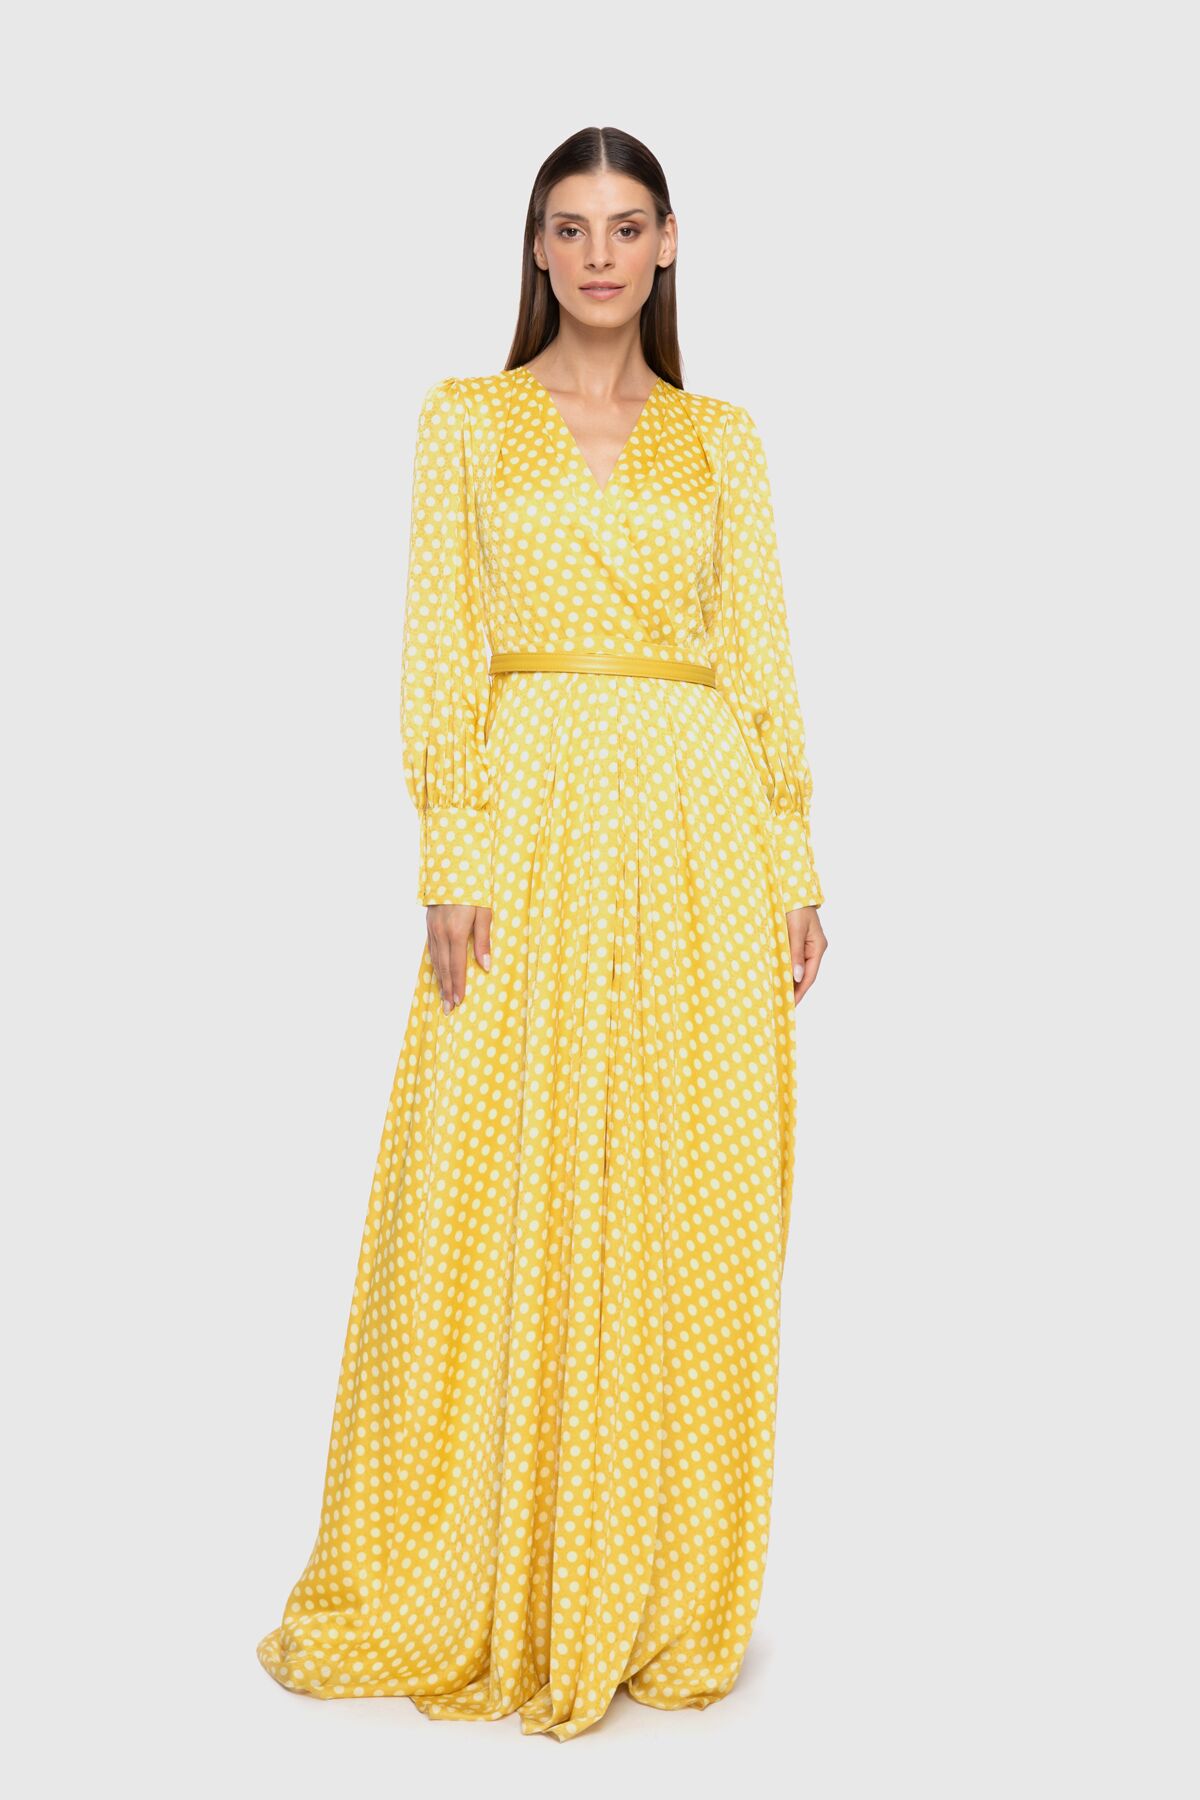  GIZIA - Double Breasted Collar Polka Dot Patterned Long Yellow Dress